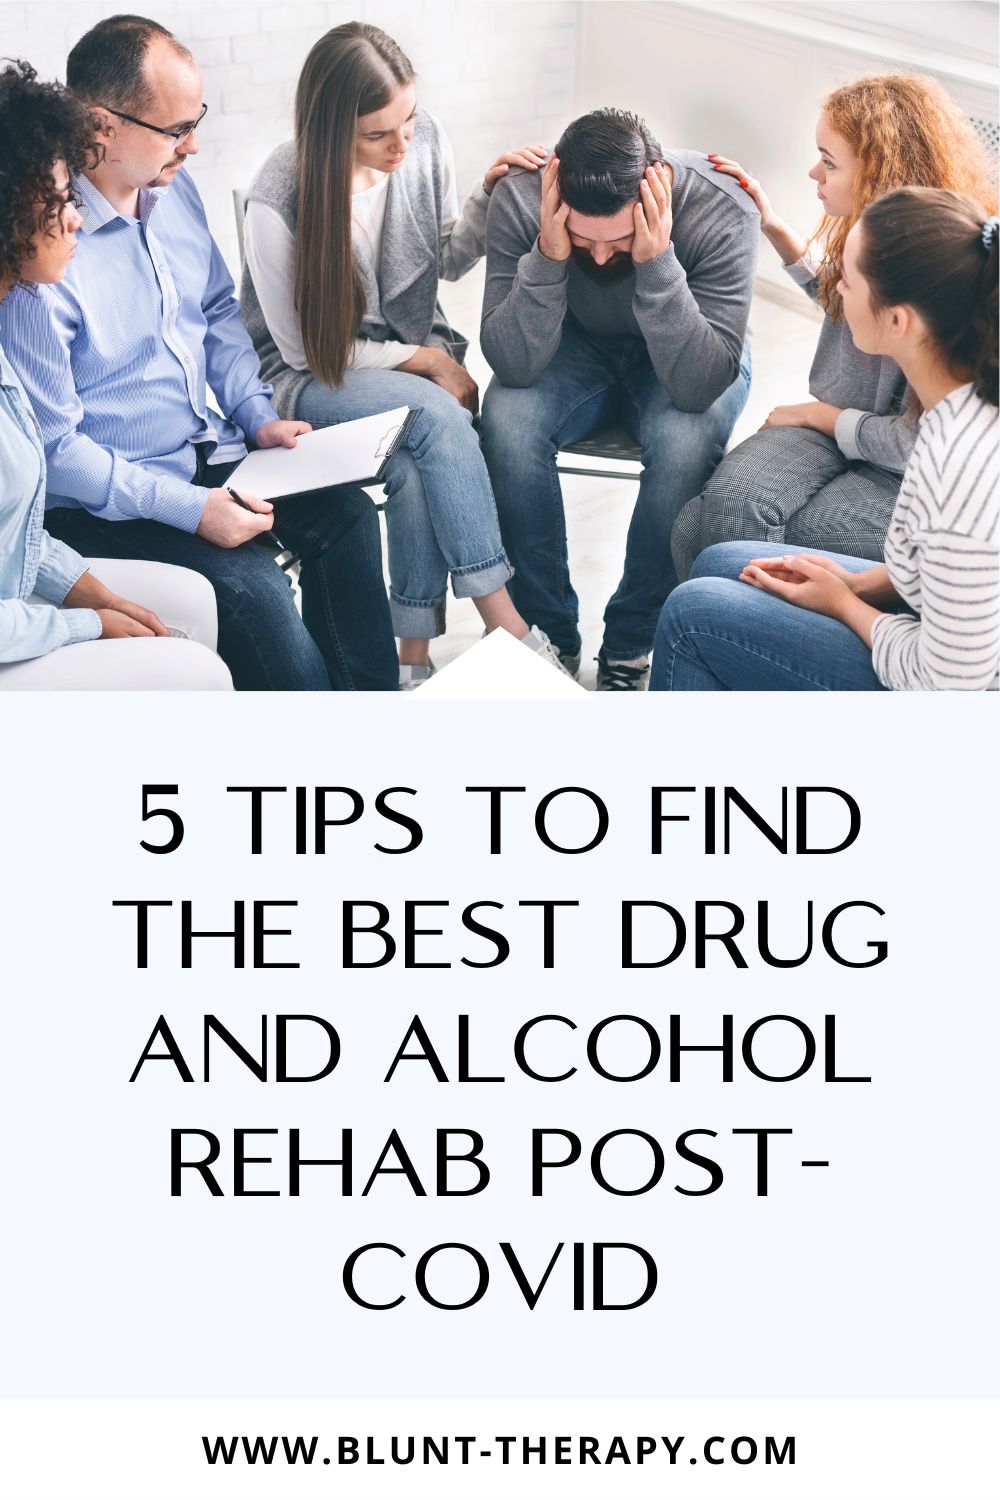 5 Tips to Find the Best Drug and Alcohol Rehab Post-COVID